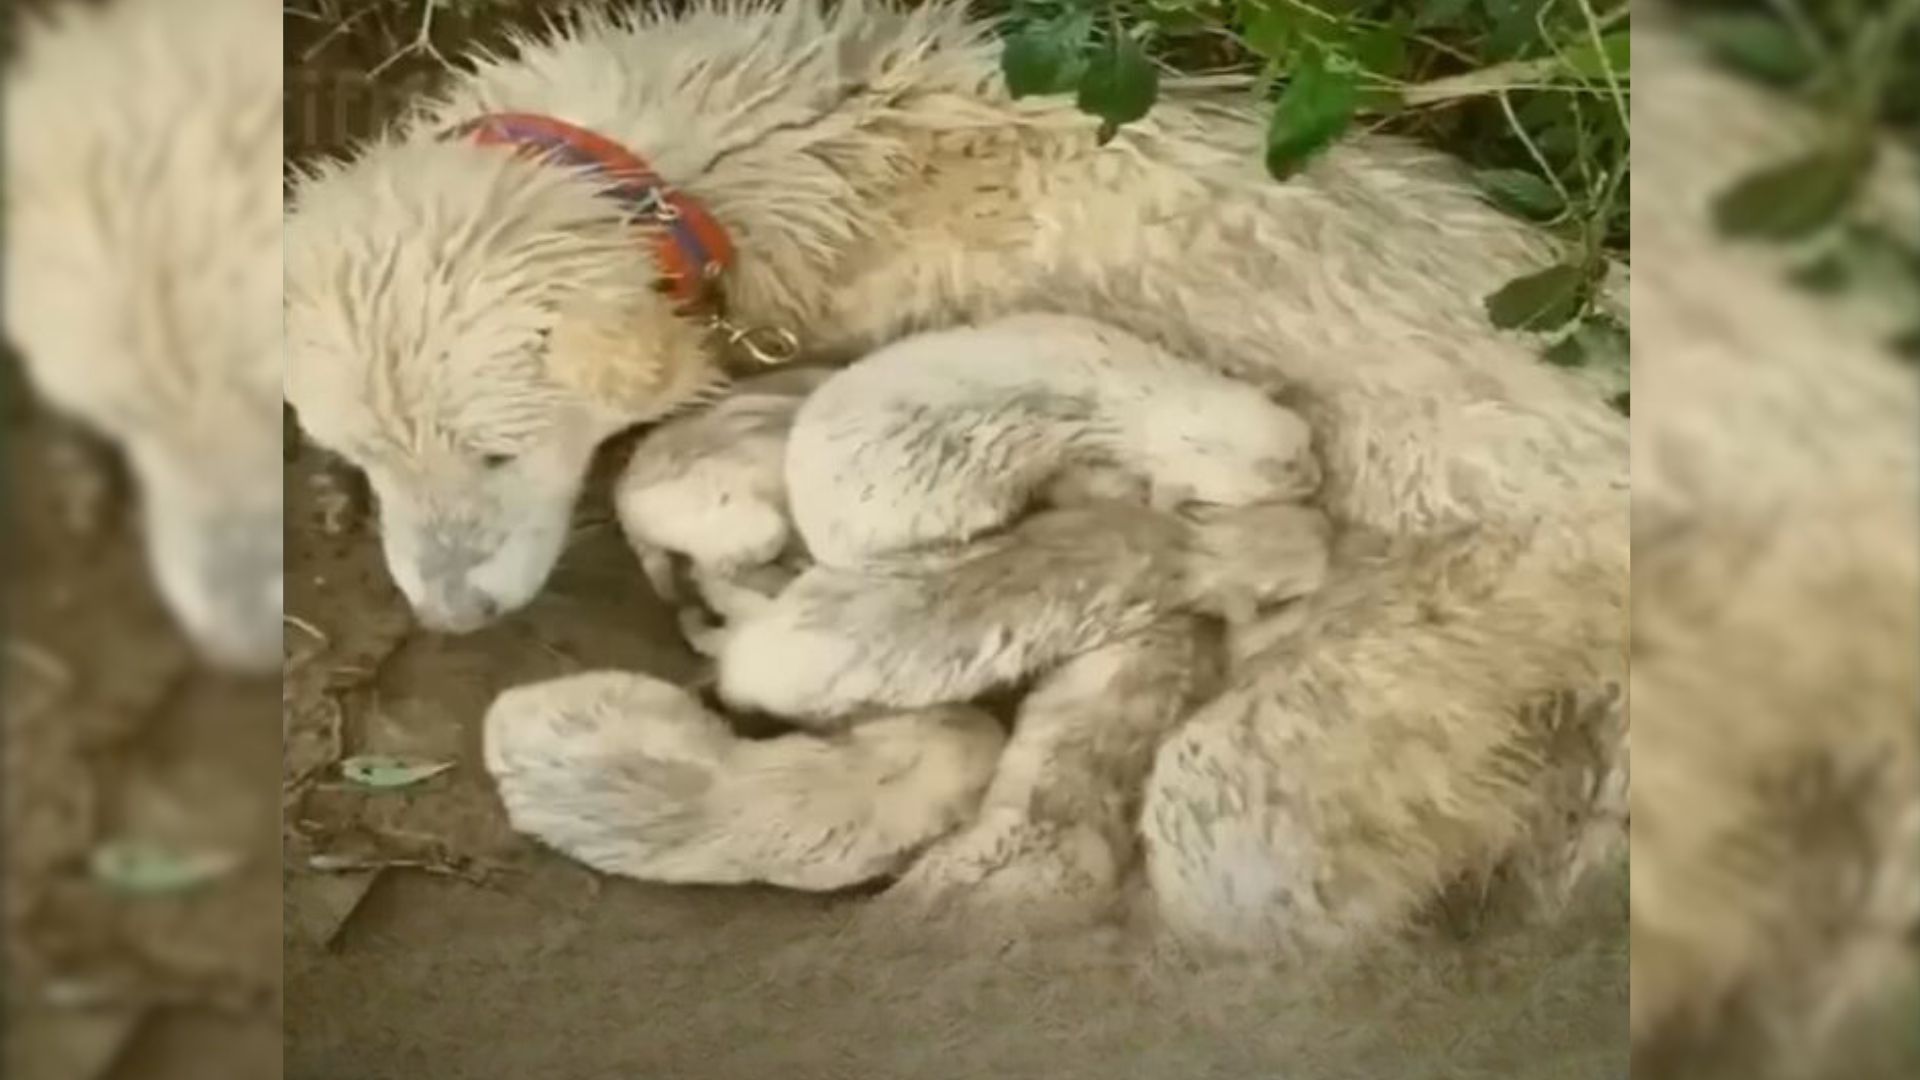 Frightened Mama Dog Who Was Protecting Her Pups Realizes That Help Finally Came